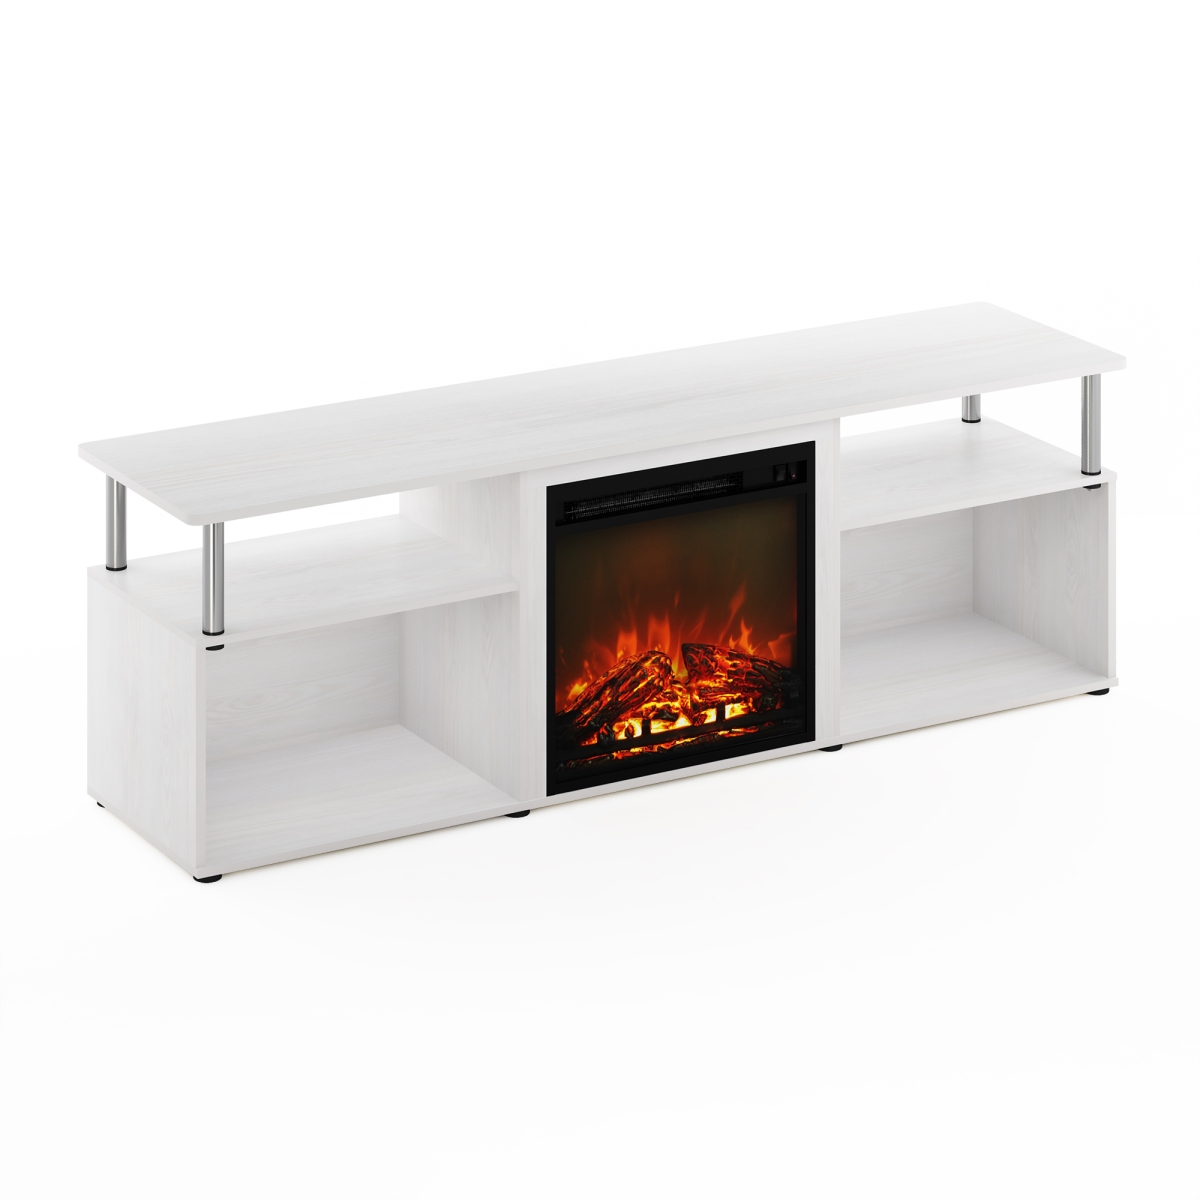 Jensen Open Storage Fireplace Entertainment Center for TV up to 70 in. with Stainless Steel Tubes, White Oak & Chrome -  LRL, LR3038853